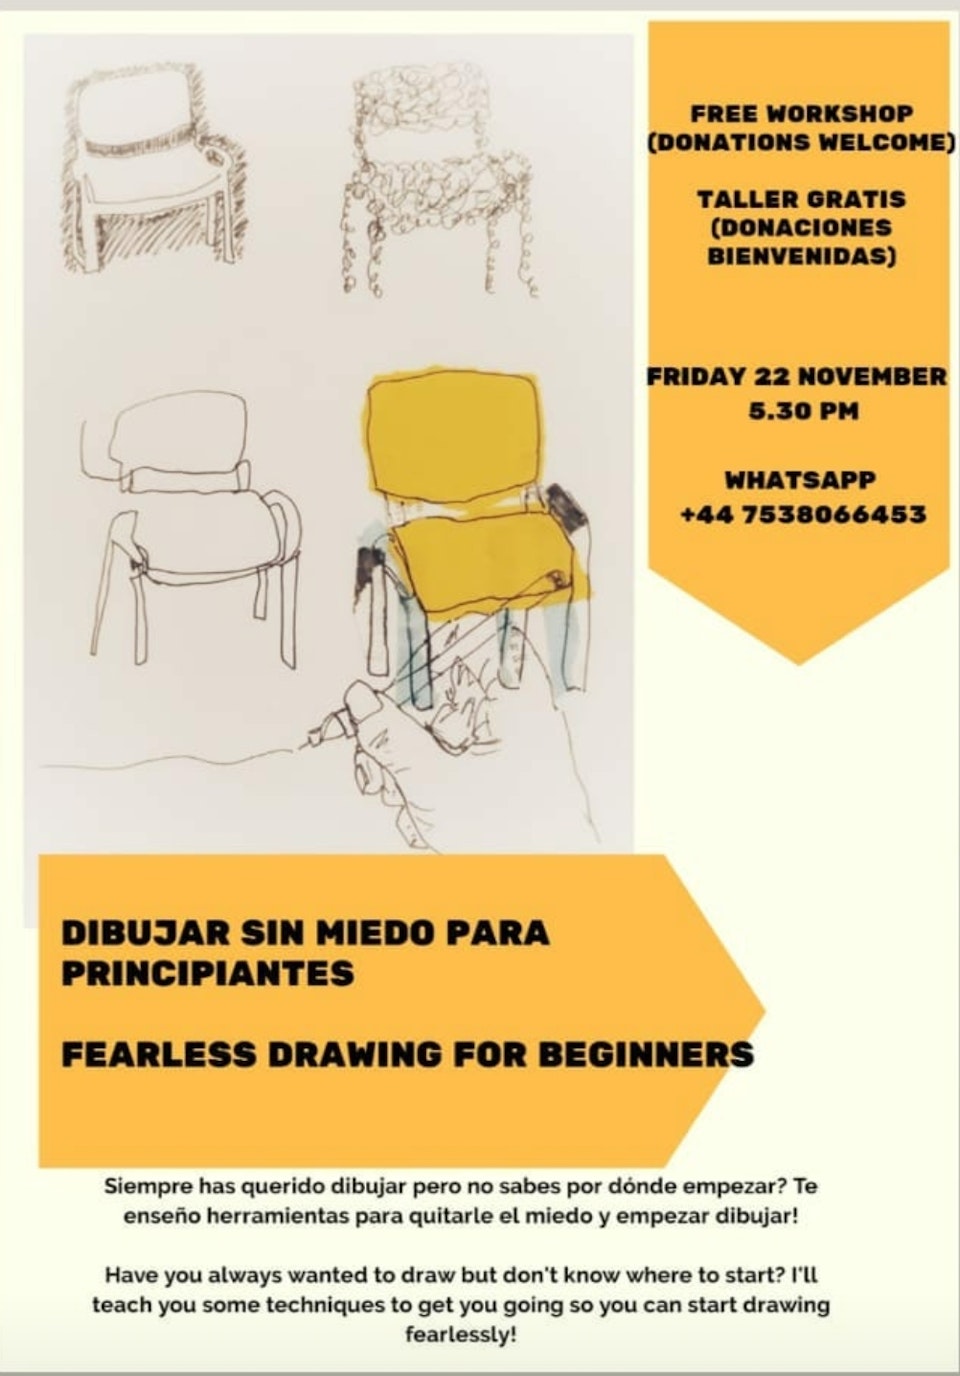 Fearless Drawing for Beginners workshop - A multi-media collaborative drawing workshop for beginniners delivered bilingually in Spanish and English in La Casa de la Buena Onda community space in Granada, Spain